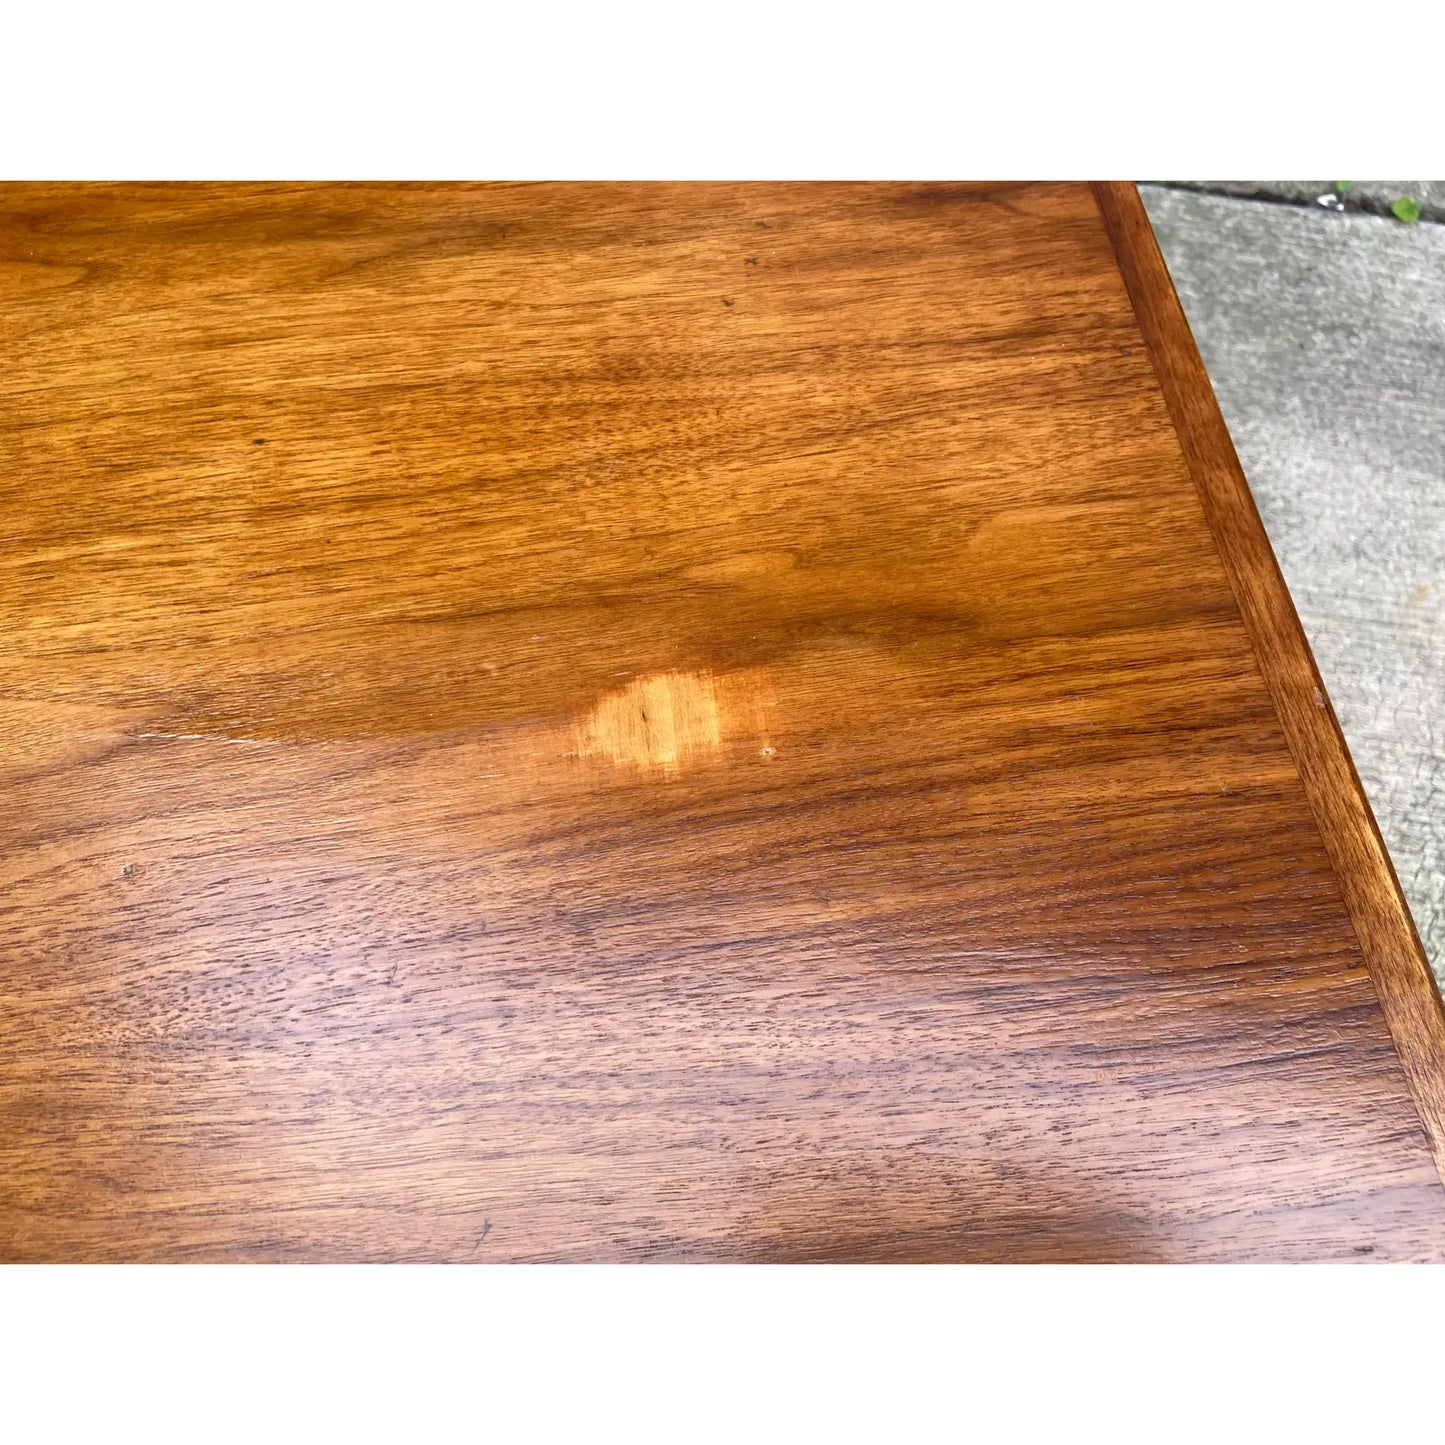 MID-CENTURY JENS RISOM DINING / CONFERENCE TABLE